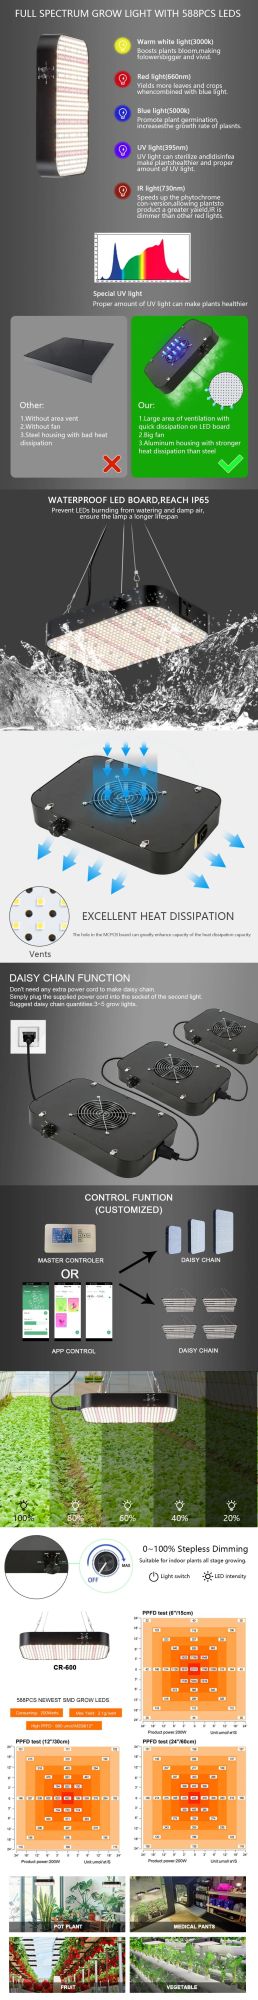 Wholesale Samsung Strip Indoor Full Spectrum Quantum High Power Board Lamp Growing Plant Horticulture LED Plants Low Lighting